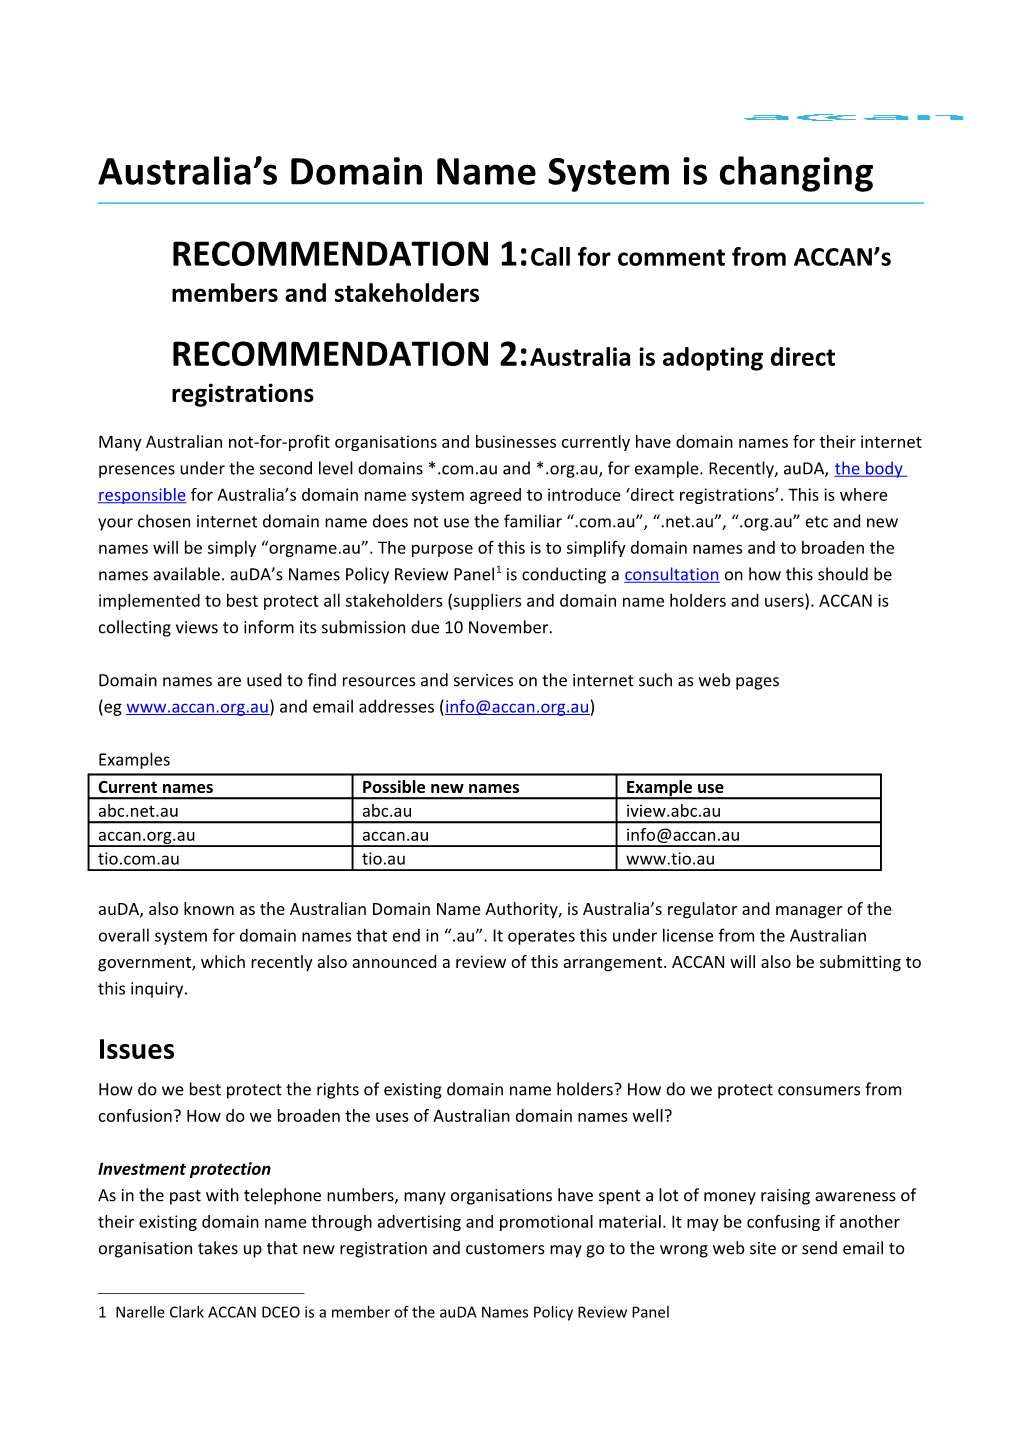 Call for Comment from ACCAN S Members and Stakeholders